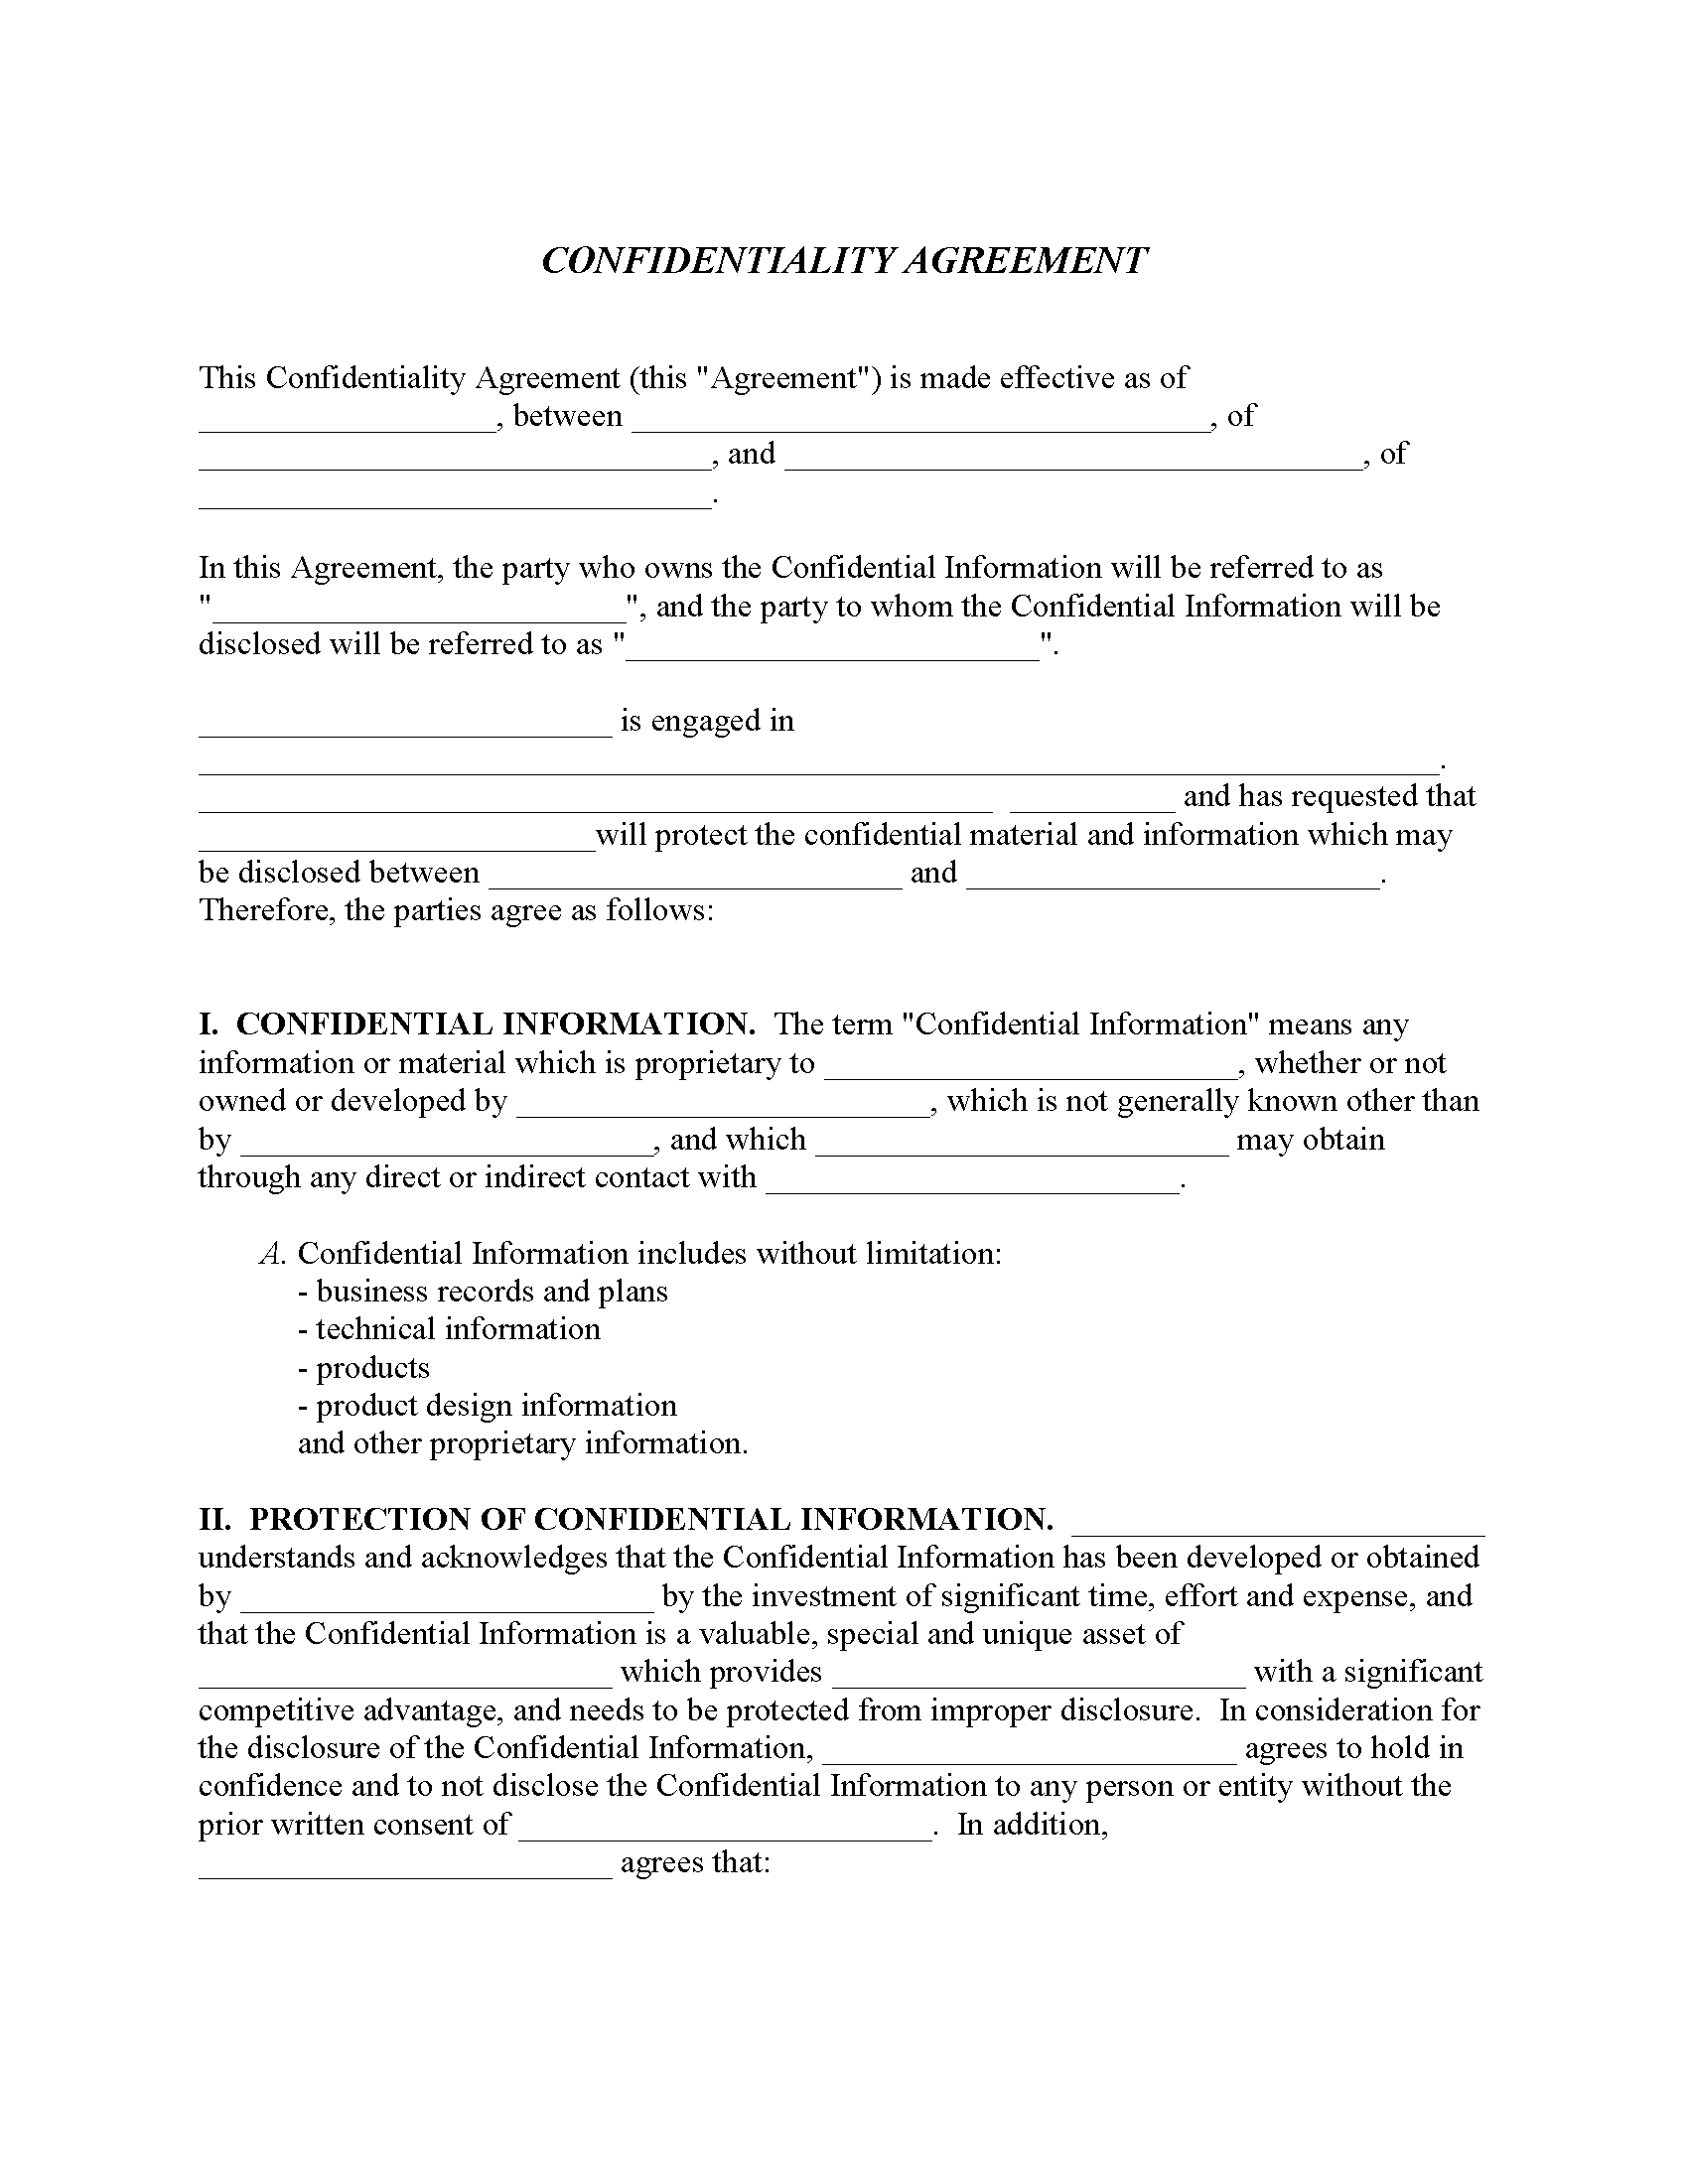 confidentiality-agreement-forms-free-printable-legal-forms